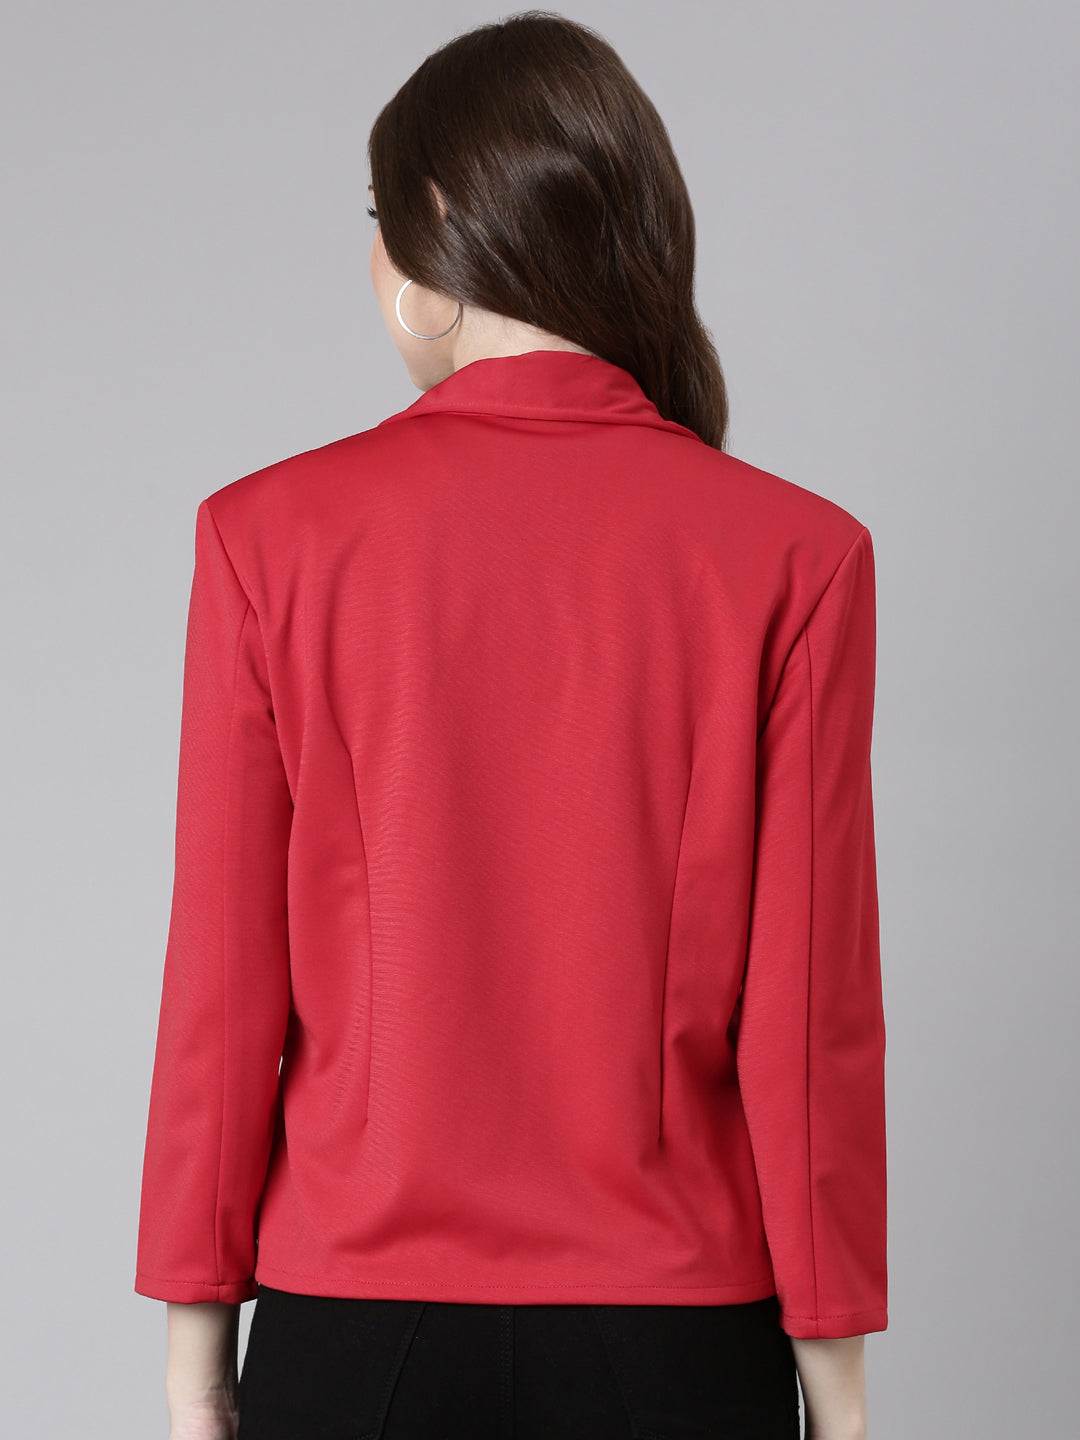 Women Red Solid Single Breasted Blazer